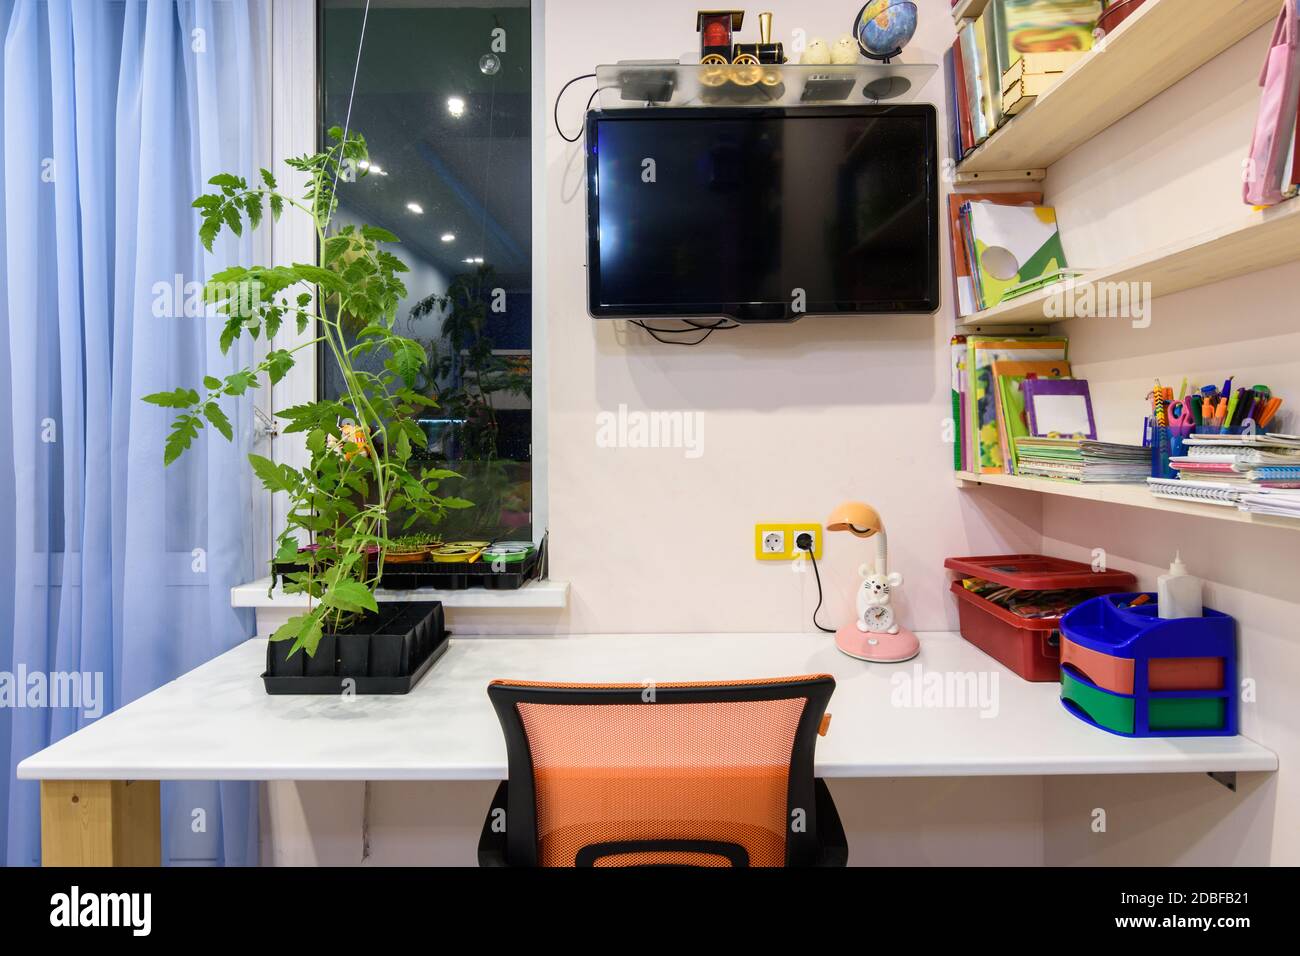 A desk in the children's room, on the wall a TV and shelves for school books Stock Photo